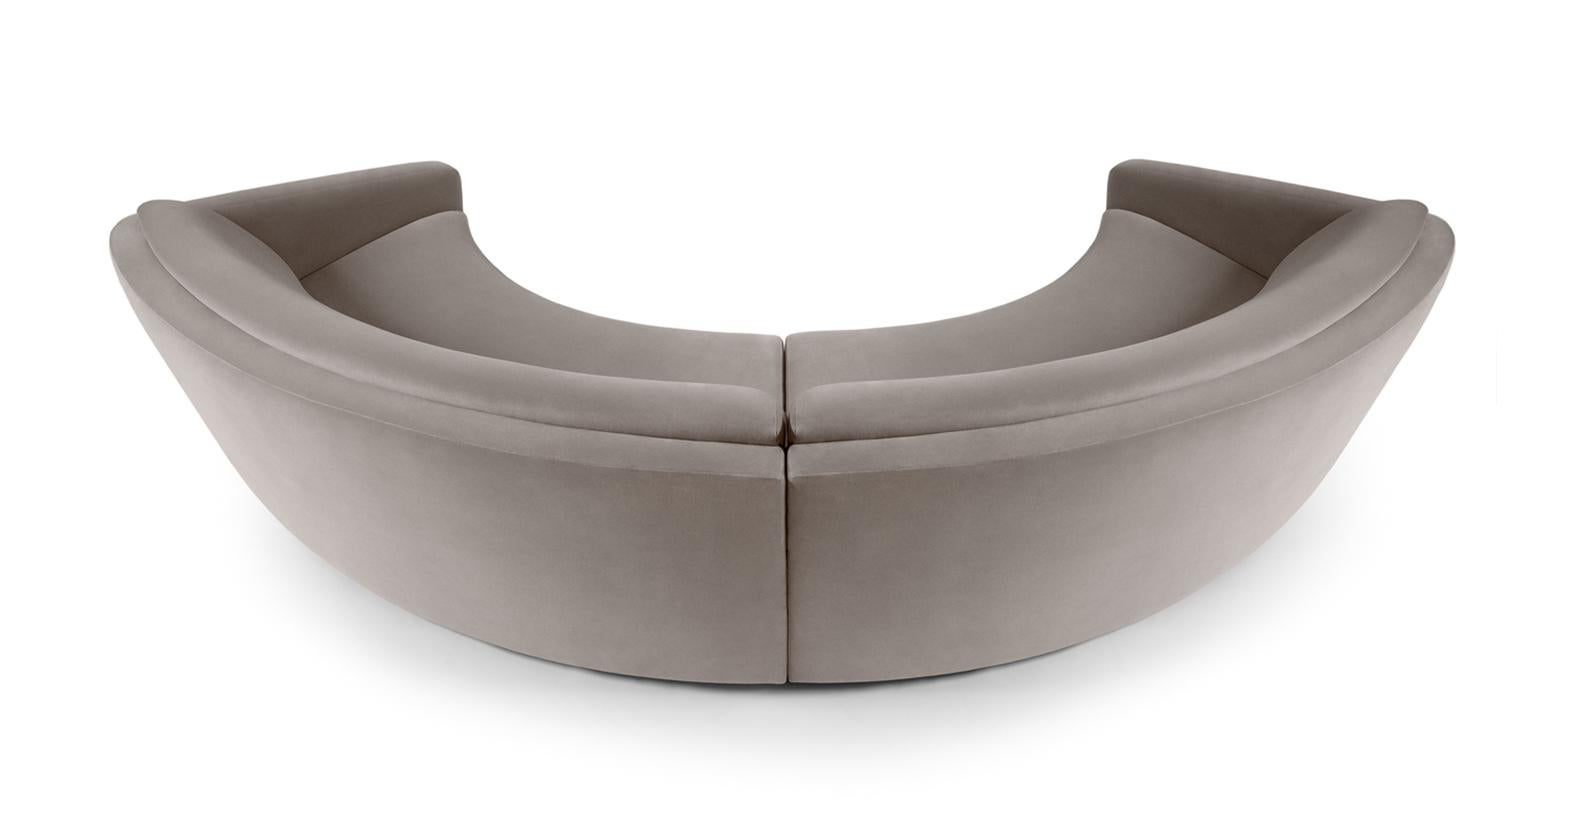 The handmade sofa is the representation of magnetism. Featuring tailored upholstery in light grey cotton velvet and a stylish brushed brass footer, it is masterfully crafted with an emphatic, yet elegant, curved contour. The sofa is a statement